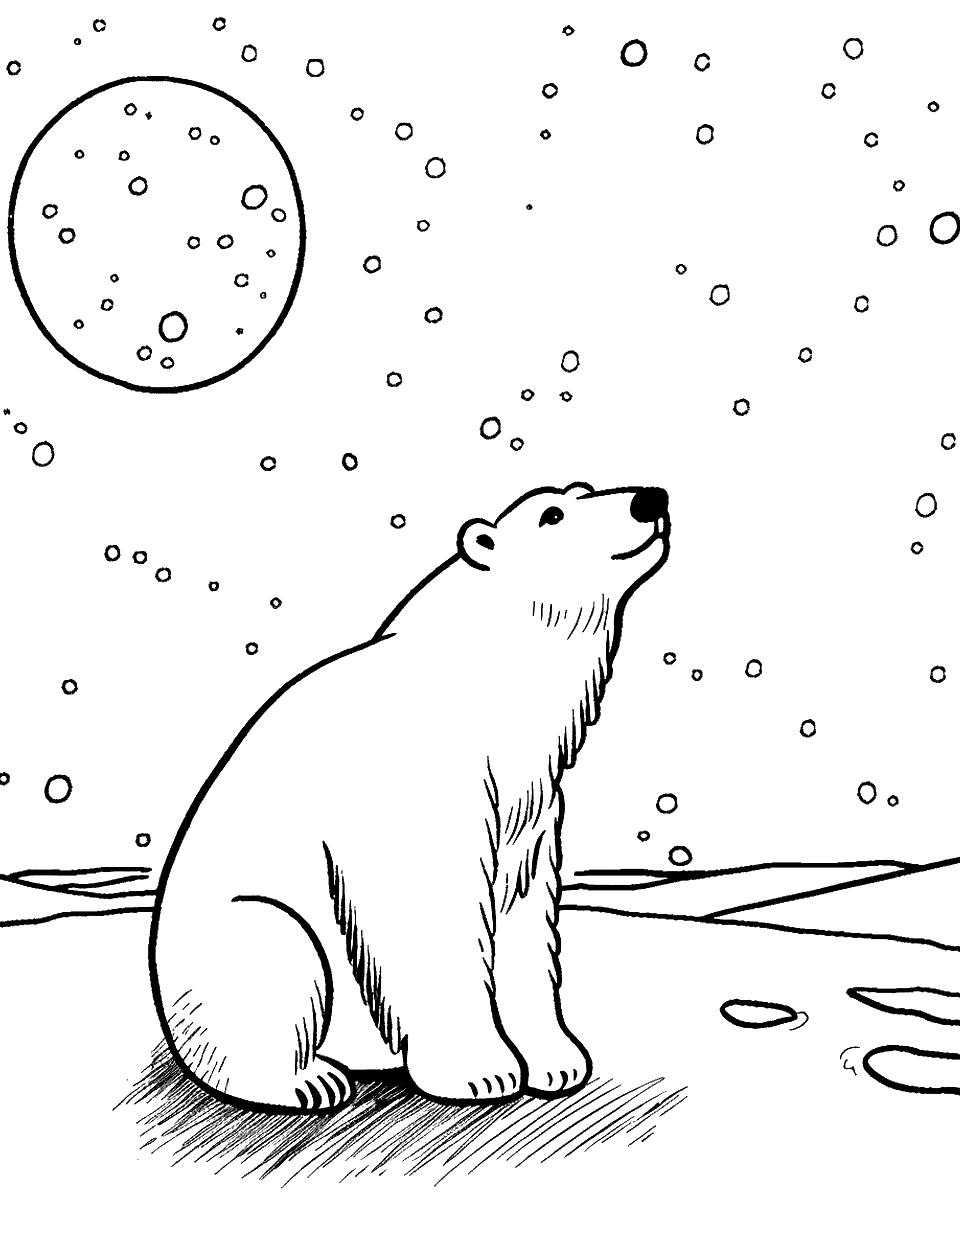 Polar Bear and the Full Moon Coloring Page - A polar bear looking at a night sky with full moon and stars.